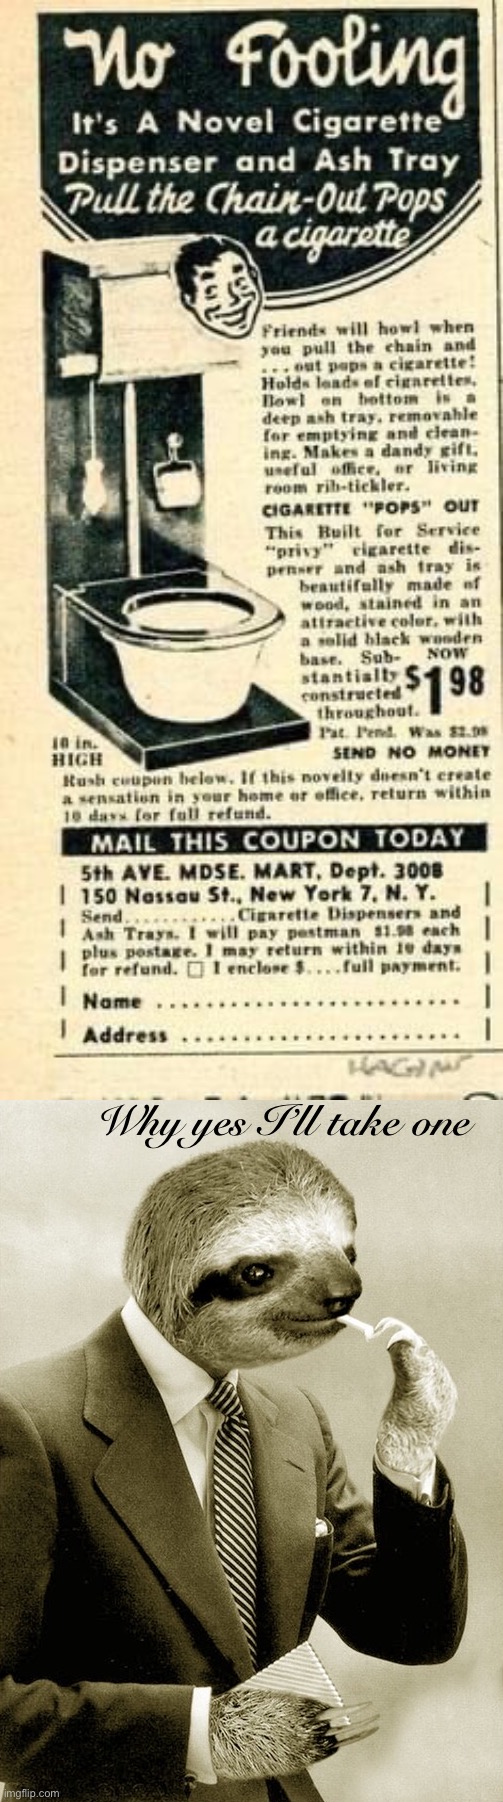 Sensational novelty for the discerning gentleman: $1.98 | Why yes I’ll take one | image tagged in curiously offensive vintage ads,s,l,o,t,h | made w/ Imgflip meme maker